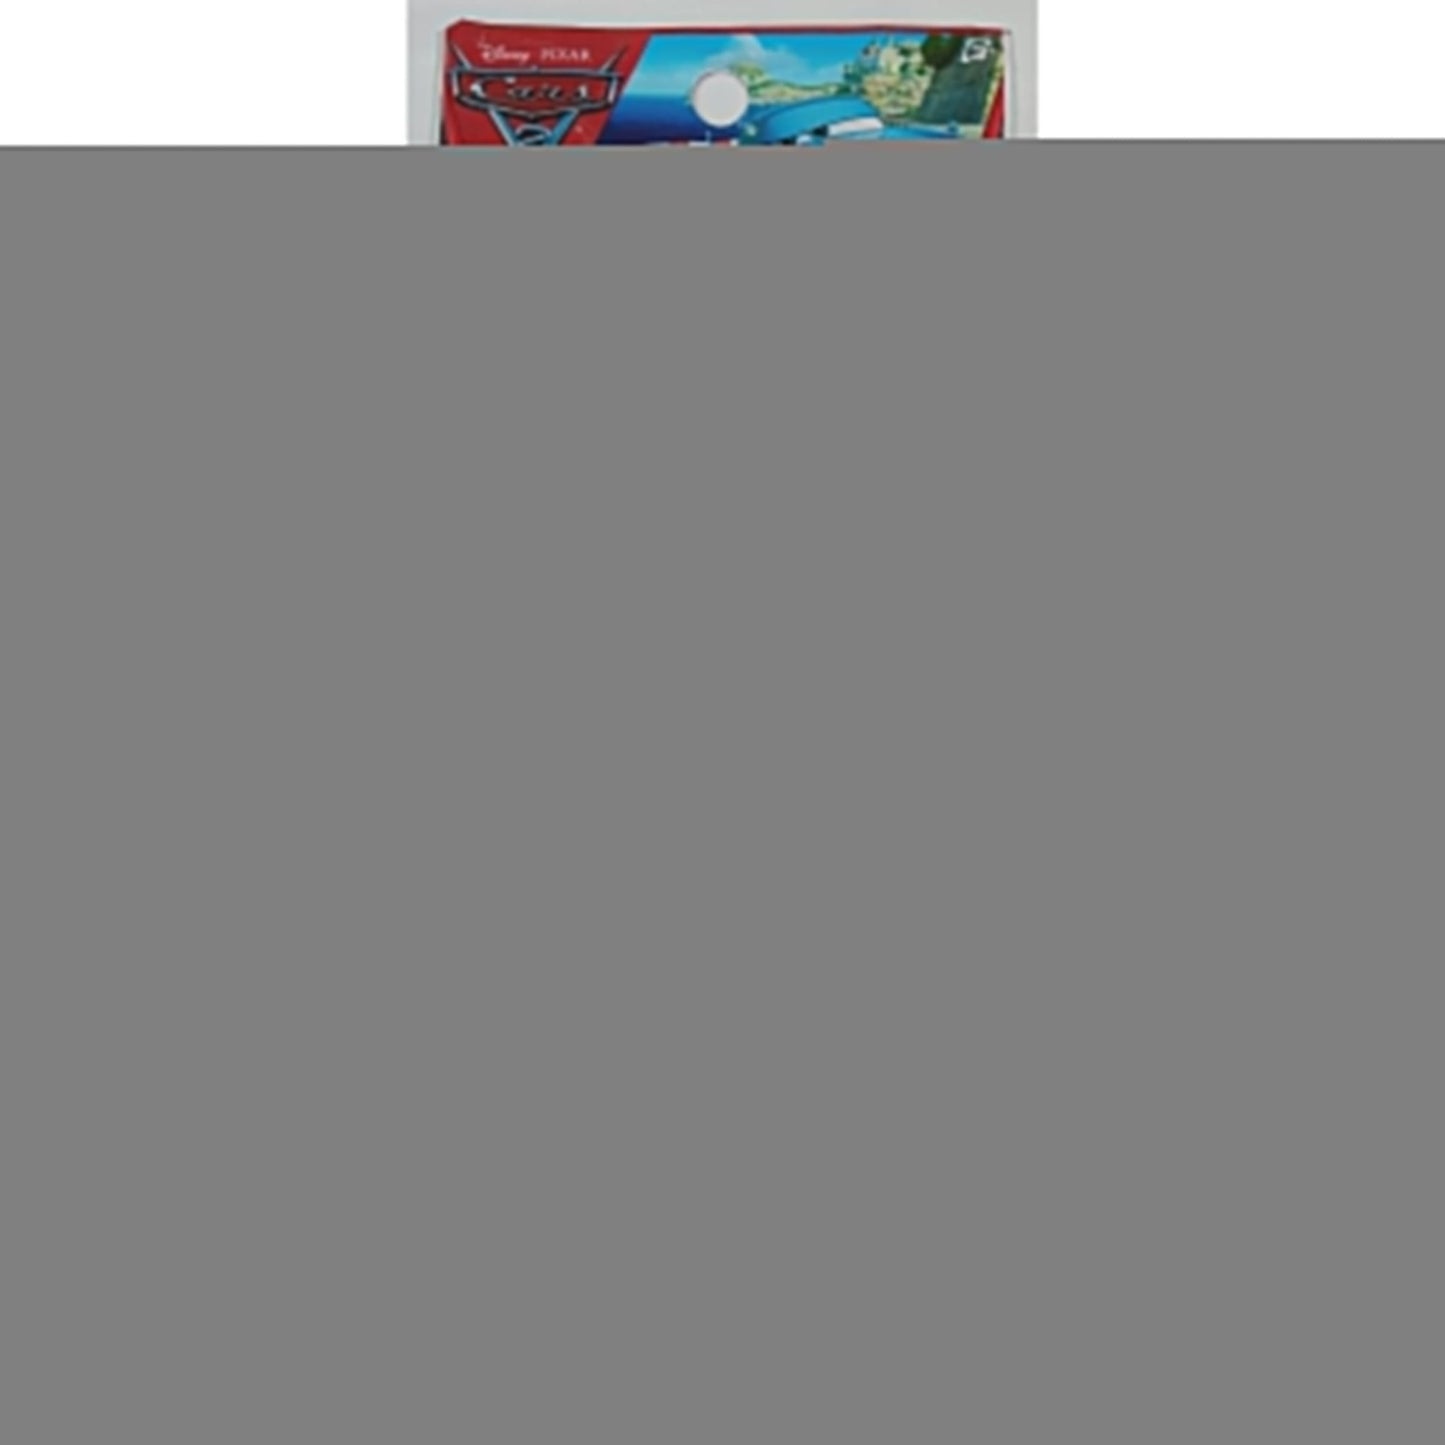 Cars 2 Light-blue/Red/Purple Wooden Pencils Pack of 12 - Partytoyz Inc